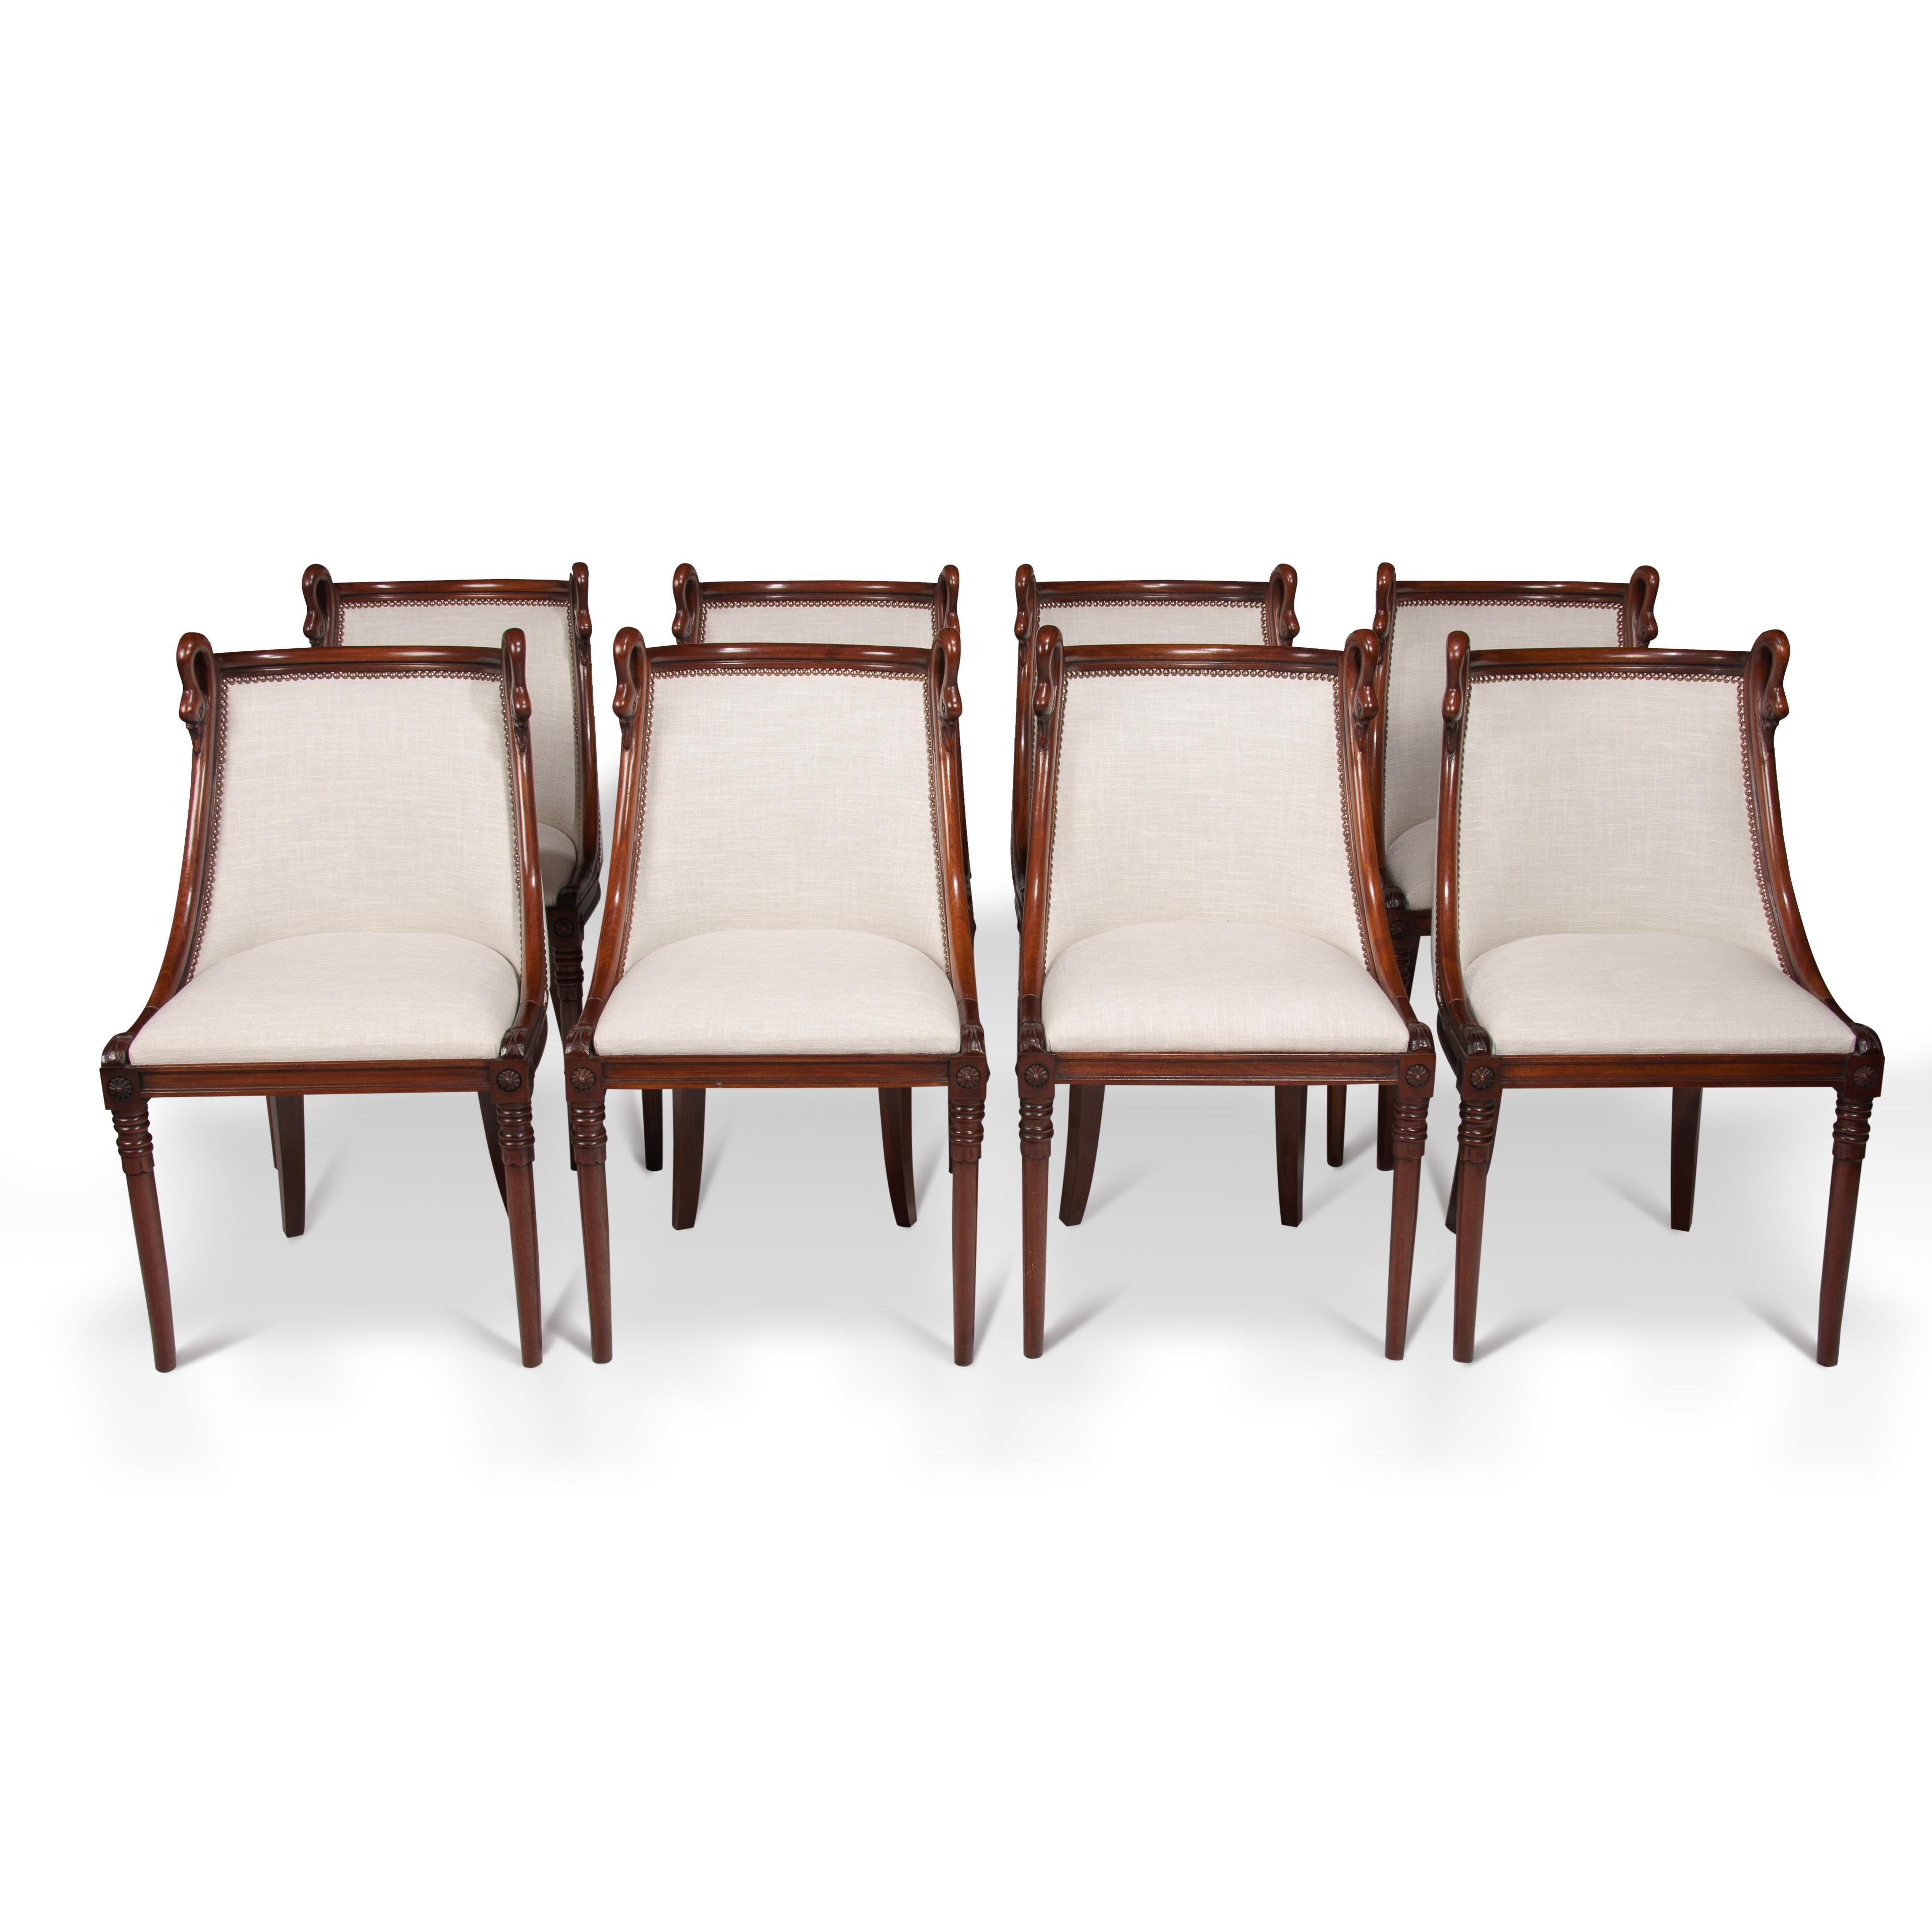 Empire Revival Set of 8 French 19th Century Empire Style Barrel Back Dining Chairs